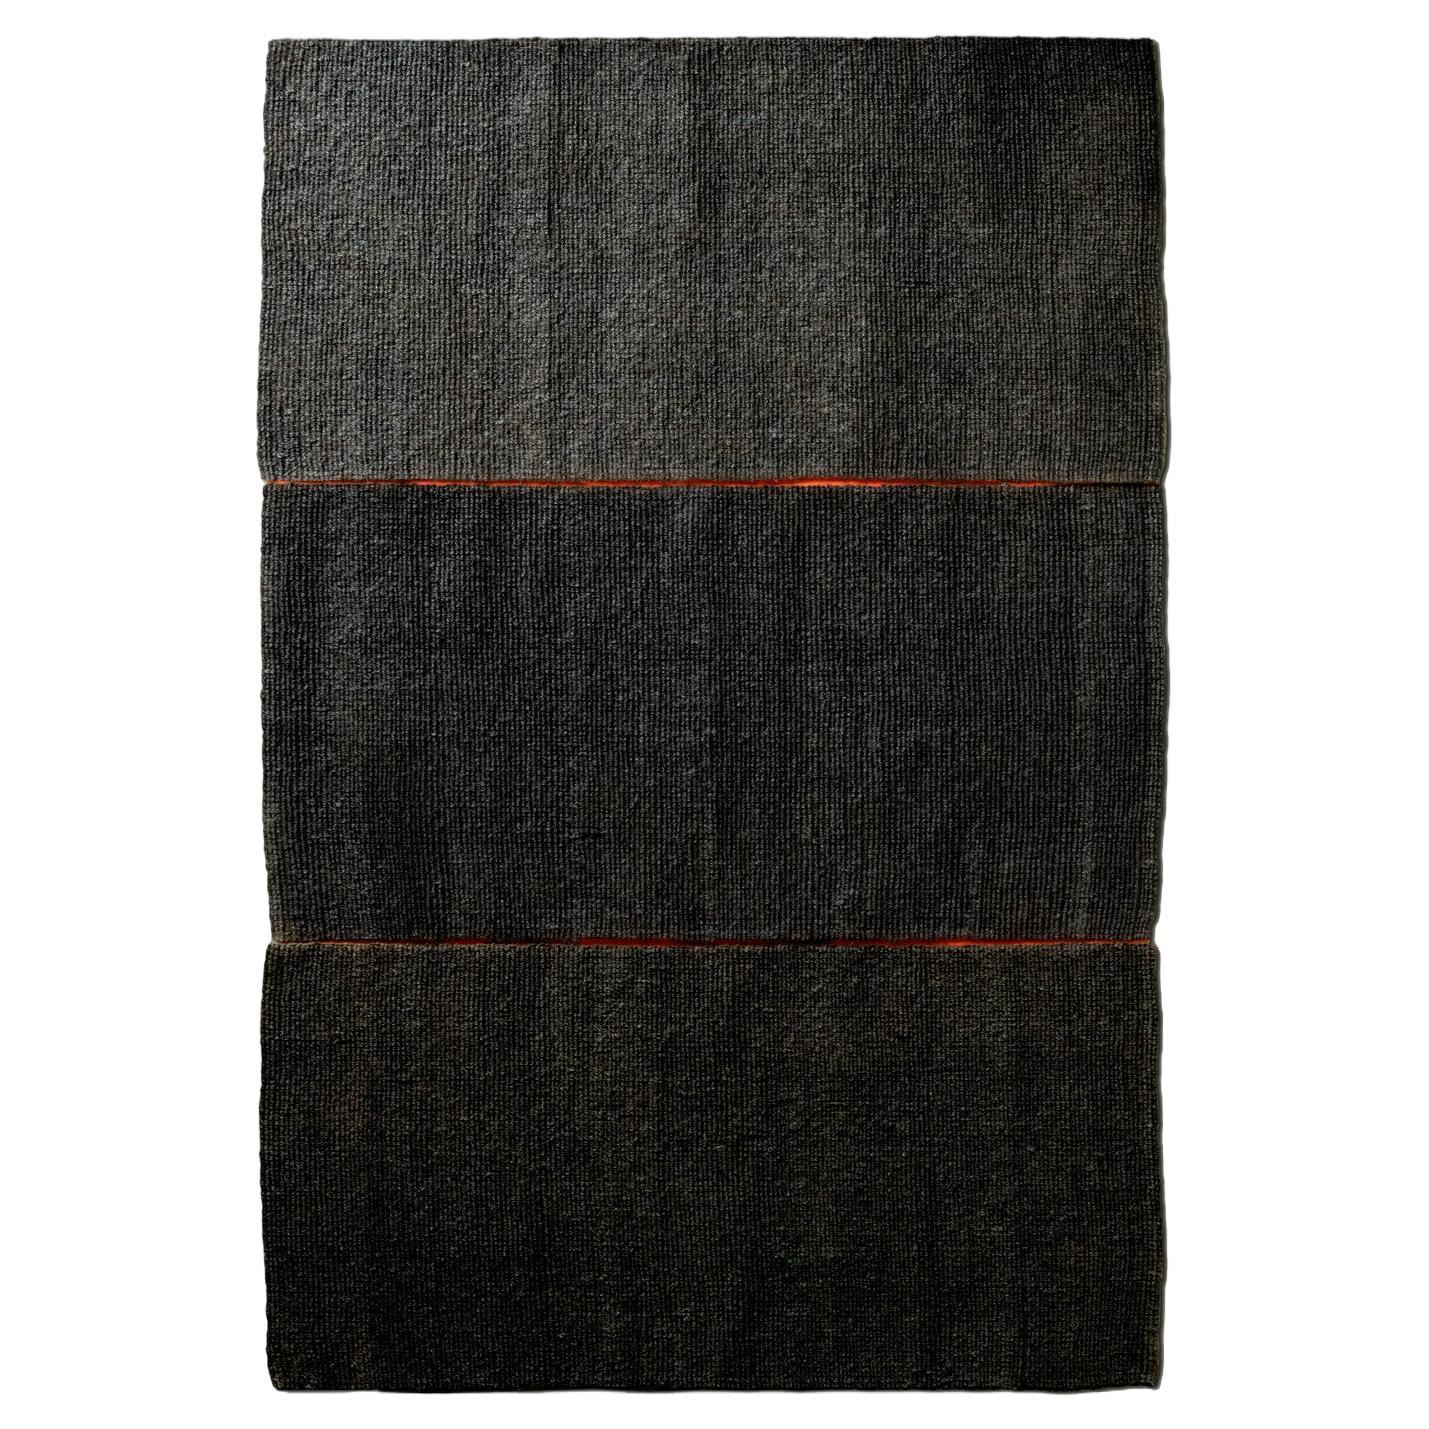 21st Cent Outdoor-Indoor Natural Black Coconut Rug by Deanna Comellini 195x285cm For Sale